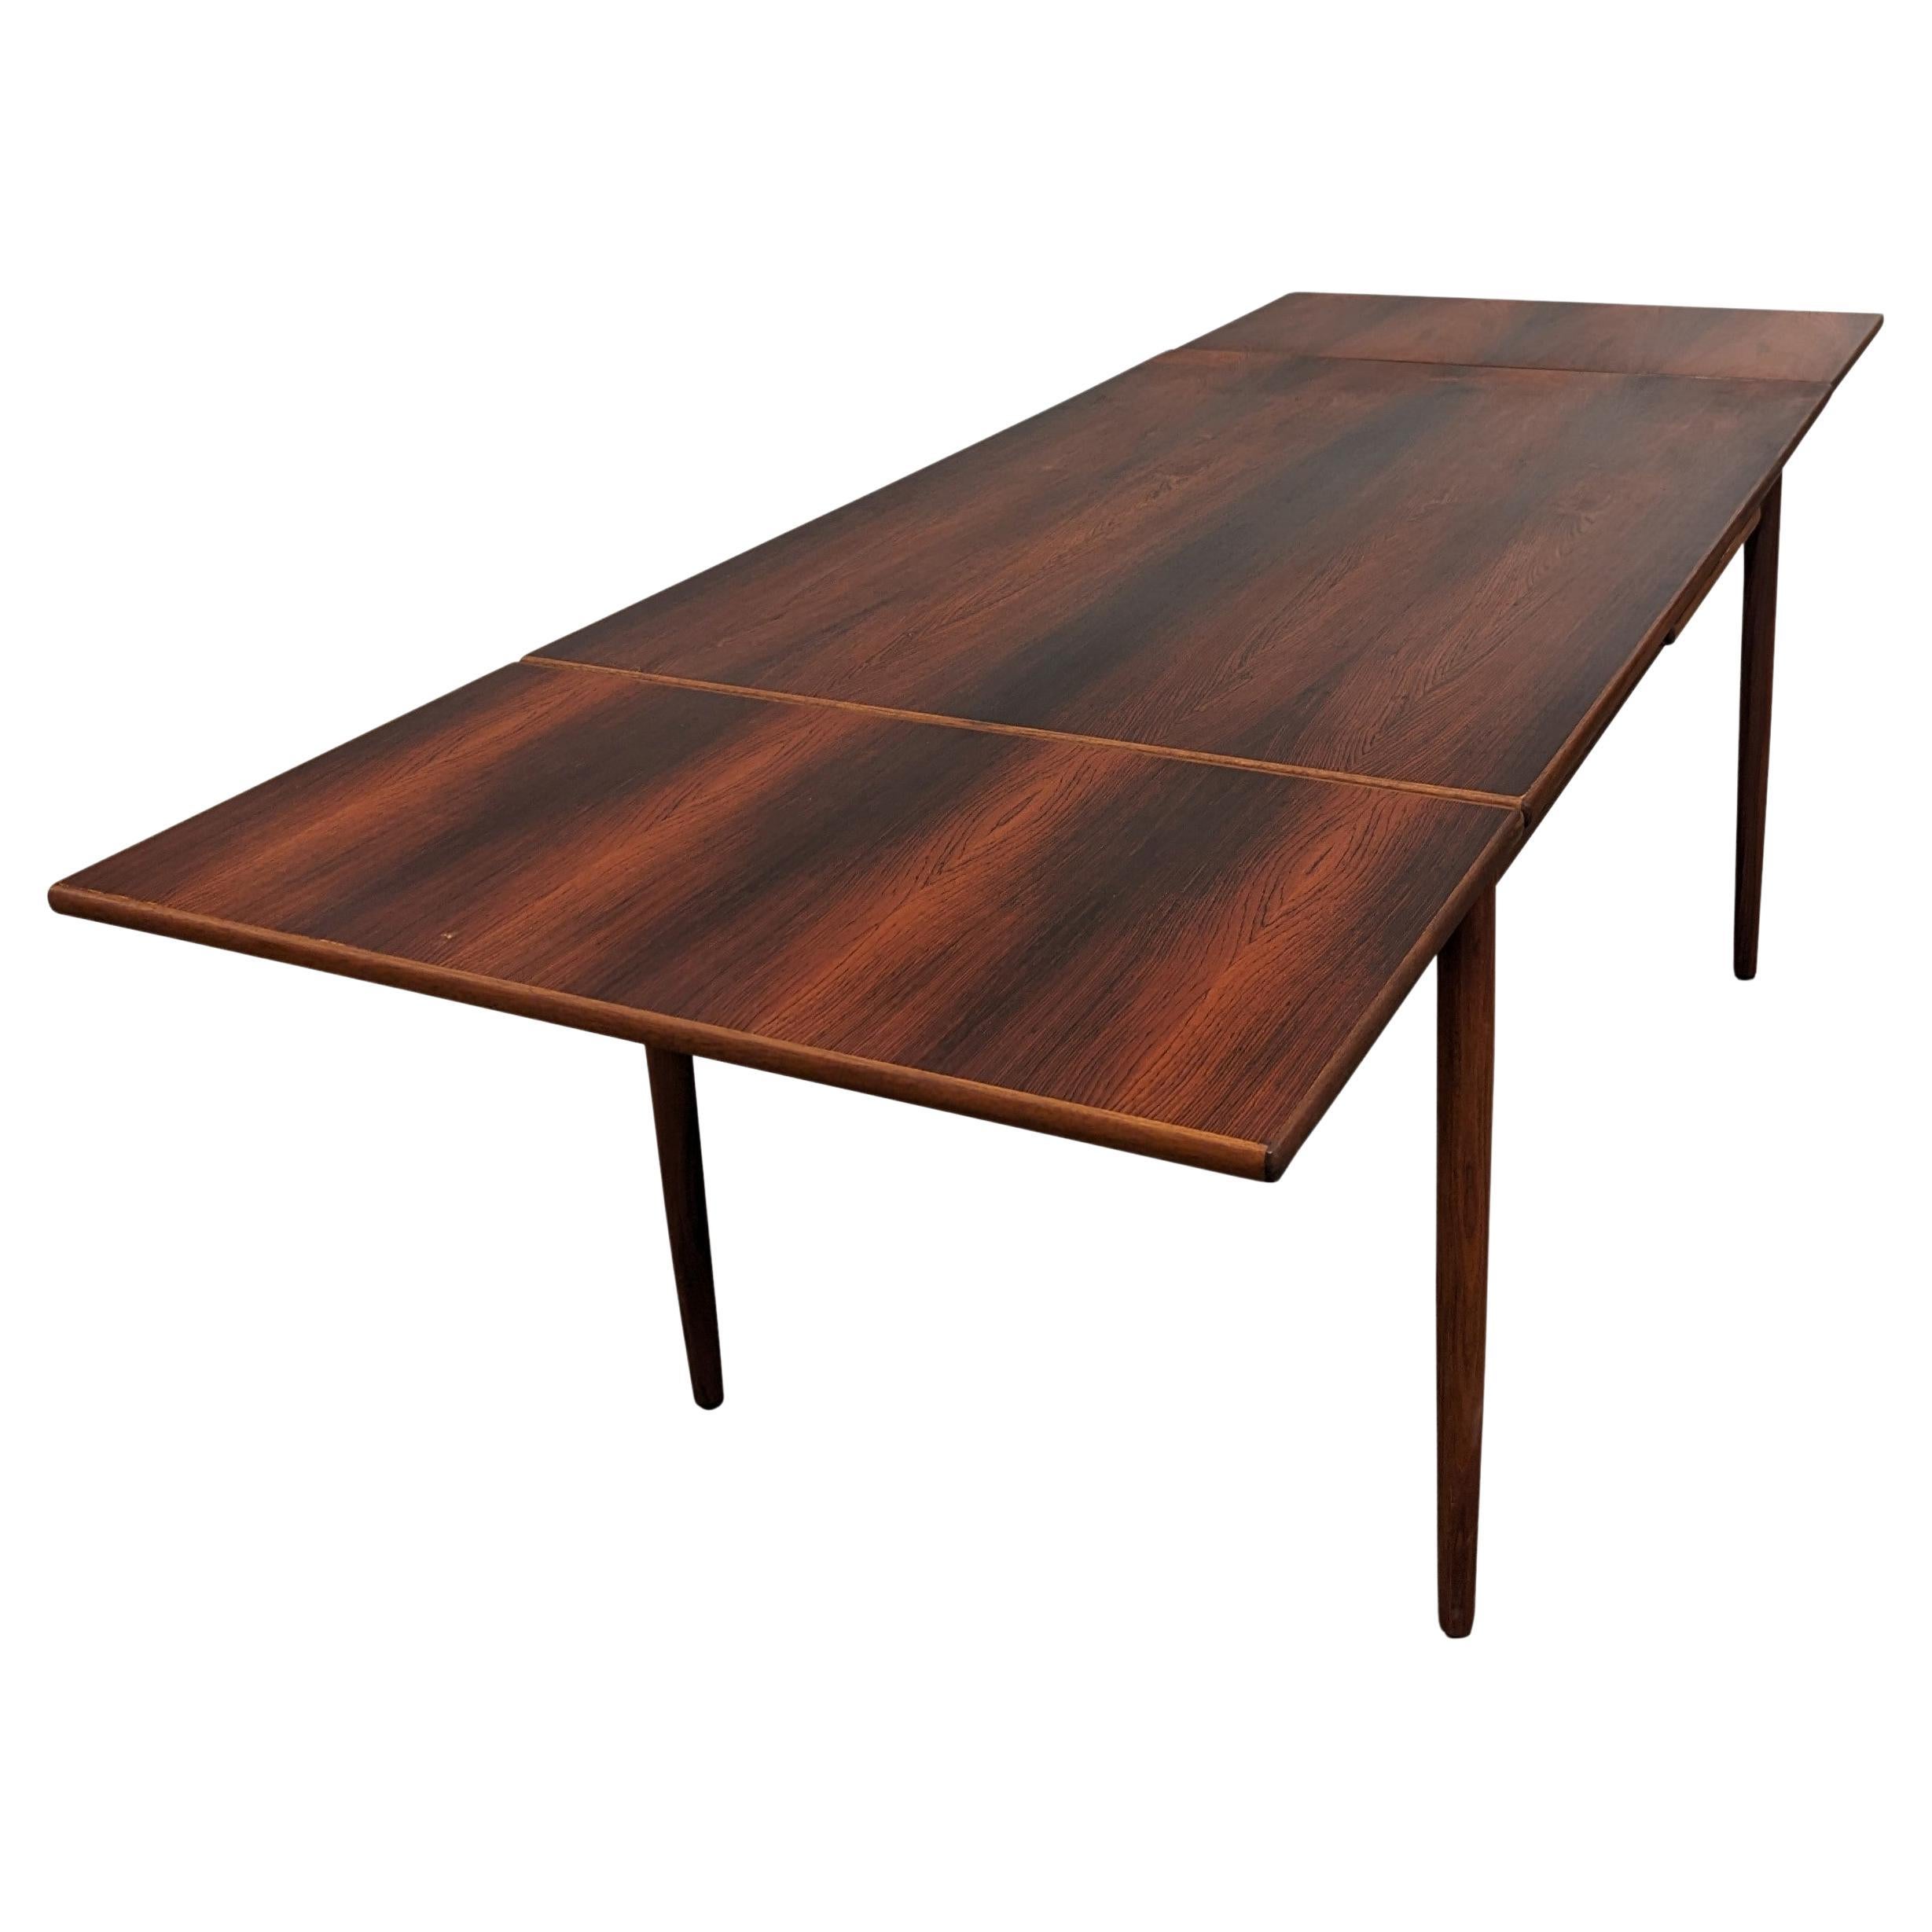 Vintage Danish Midcentury Rosewood Dining Table with 2 Hidden Leaves, 022310